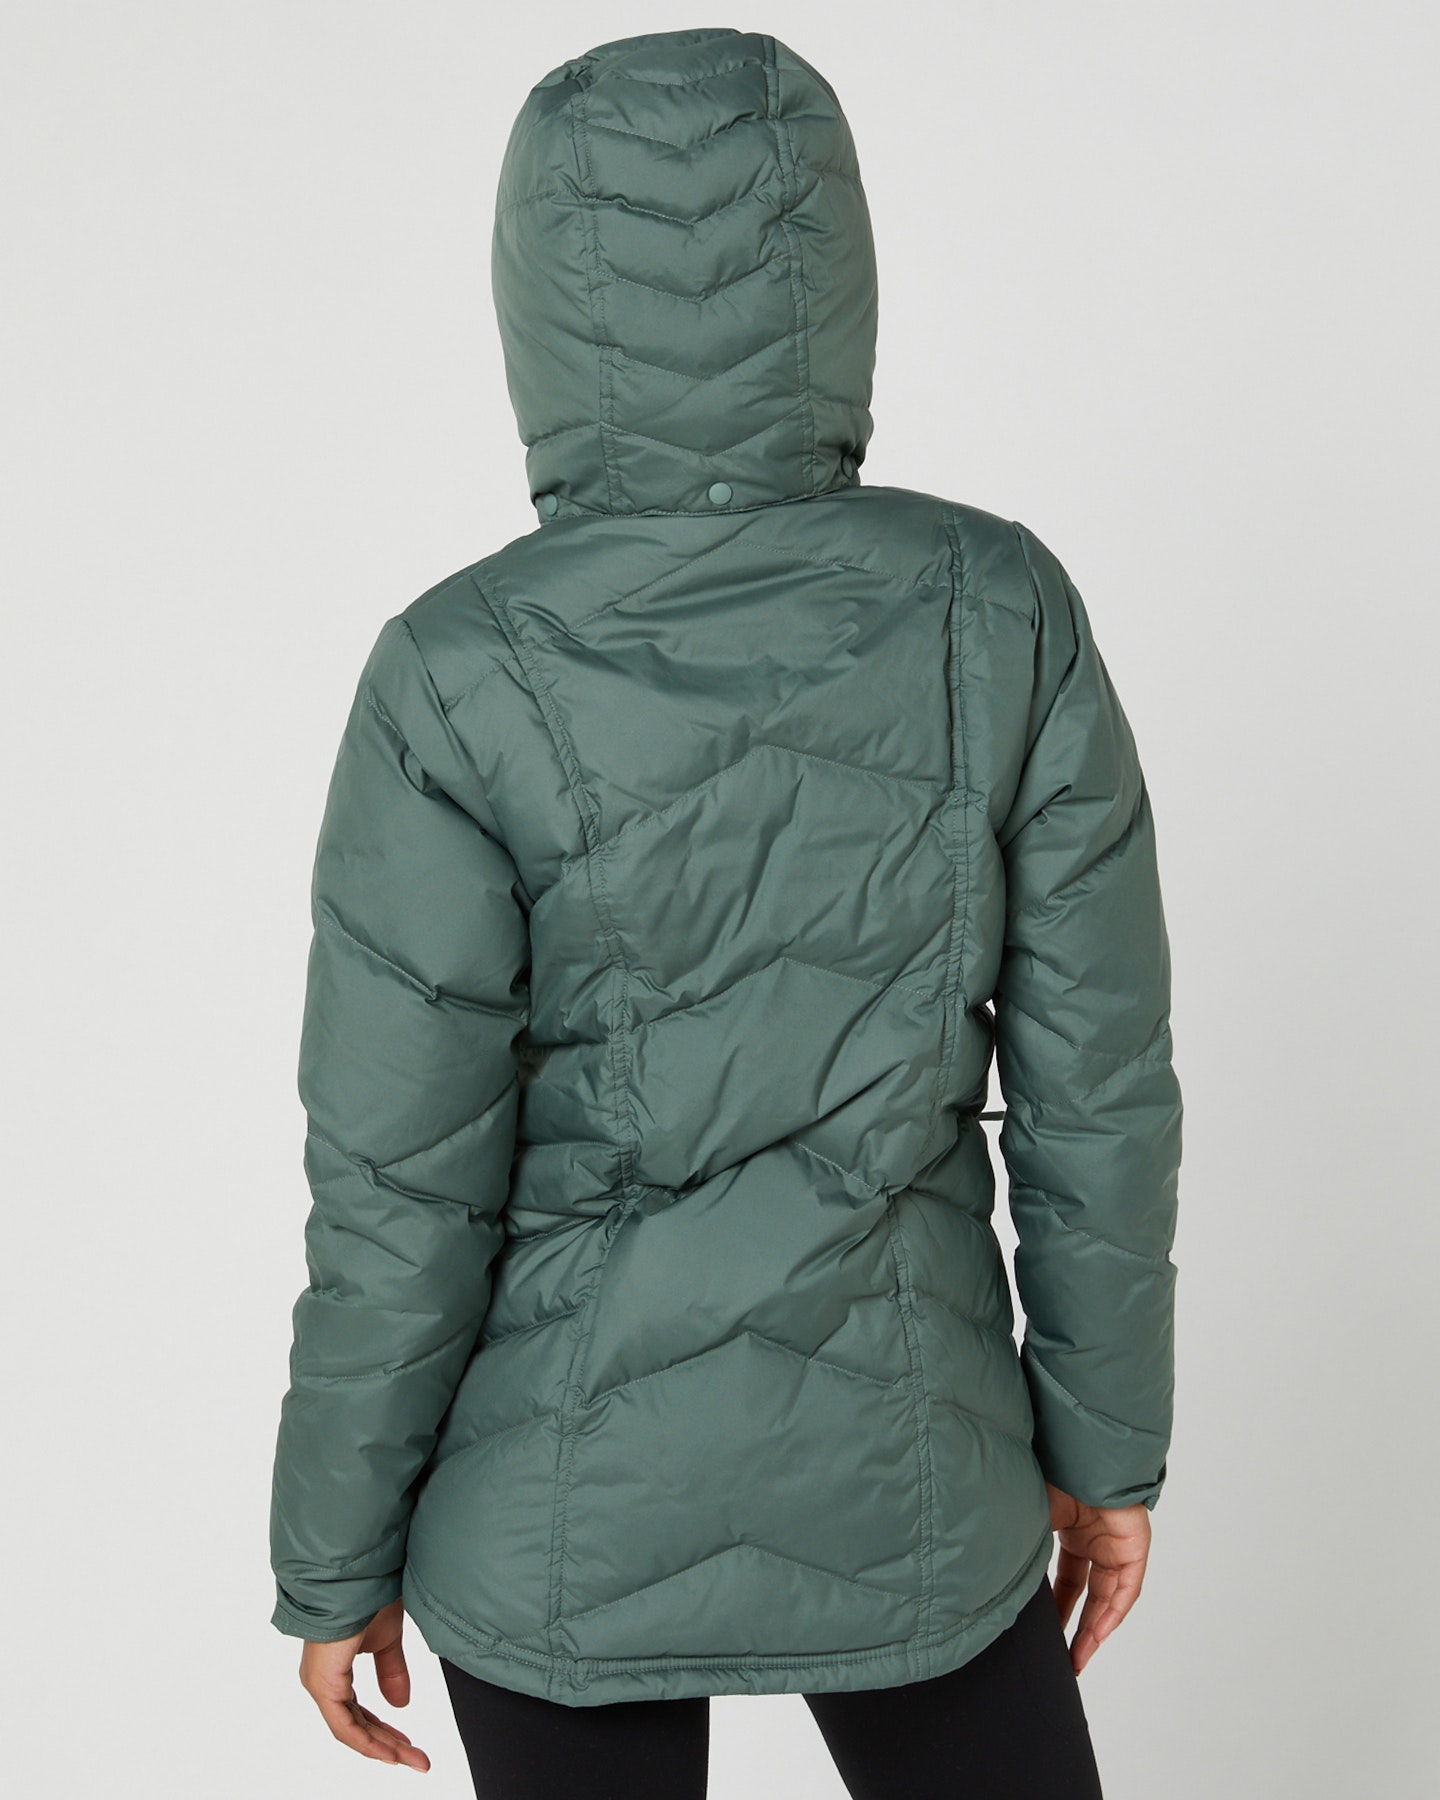 Patagonia Womens Down With It Jacket - Hemlock Green | SurfStitch